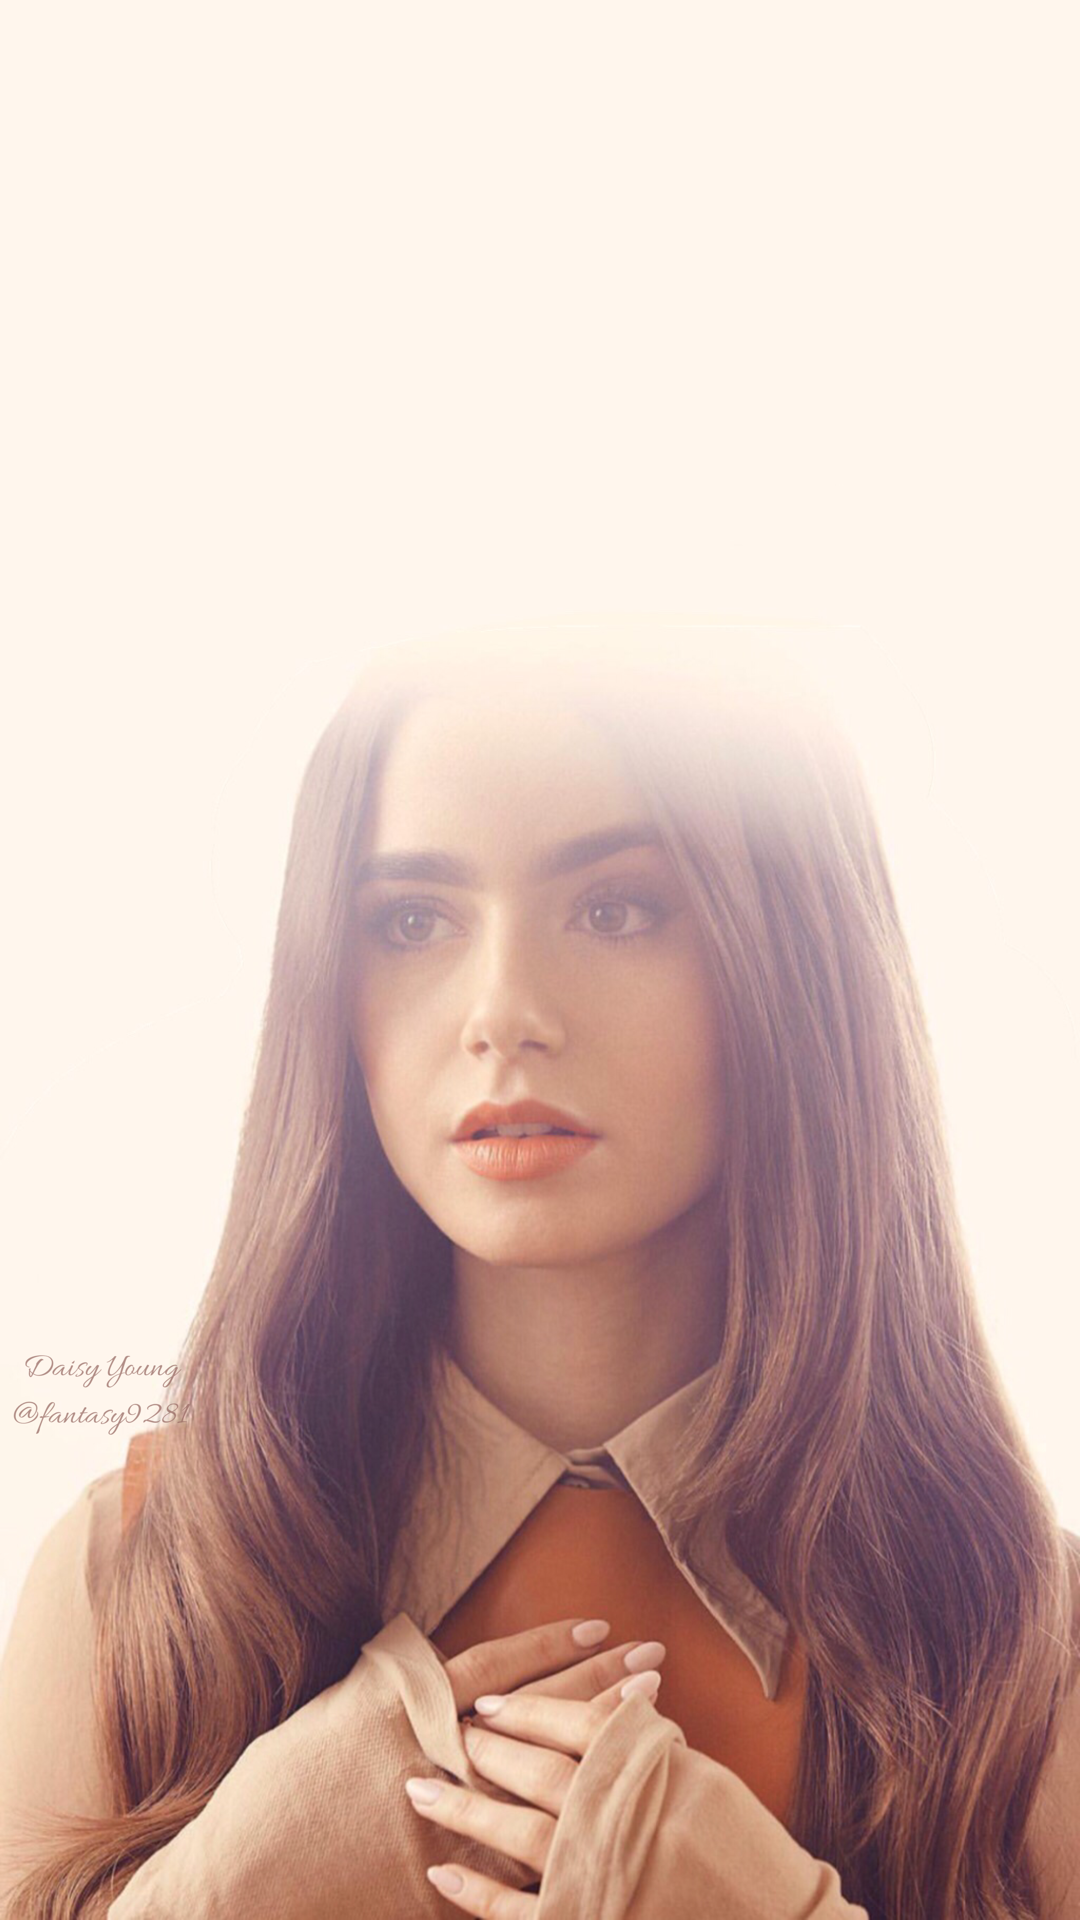 Lily Collins Gorgeous Wallpapers